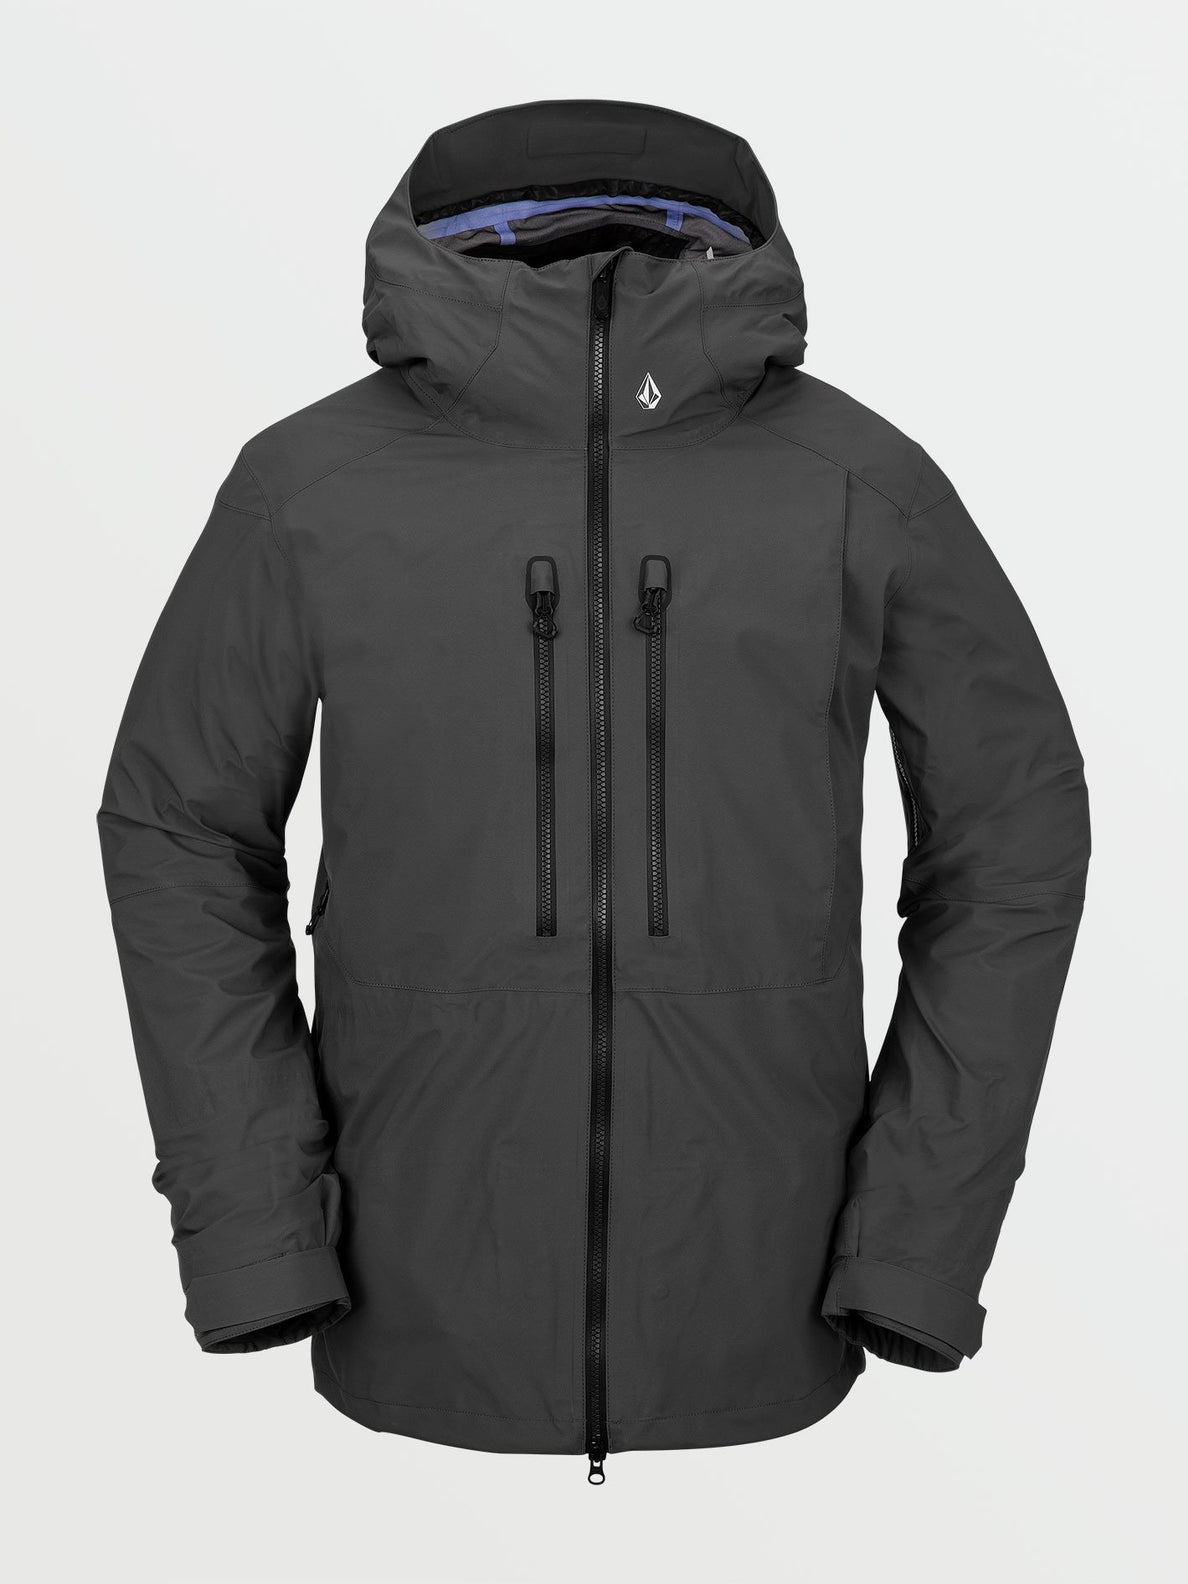 GUIDE GORE-TEX JACKET (G0652101_DGR) [F]